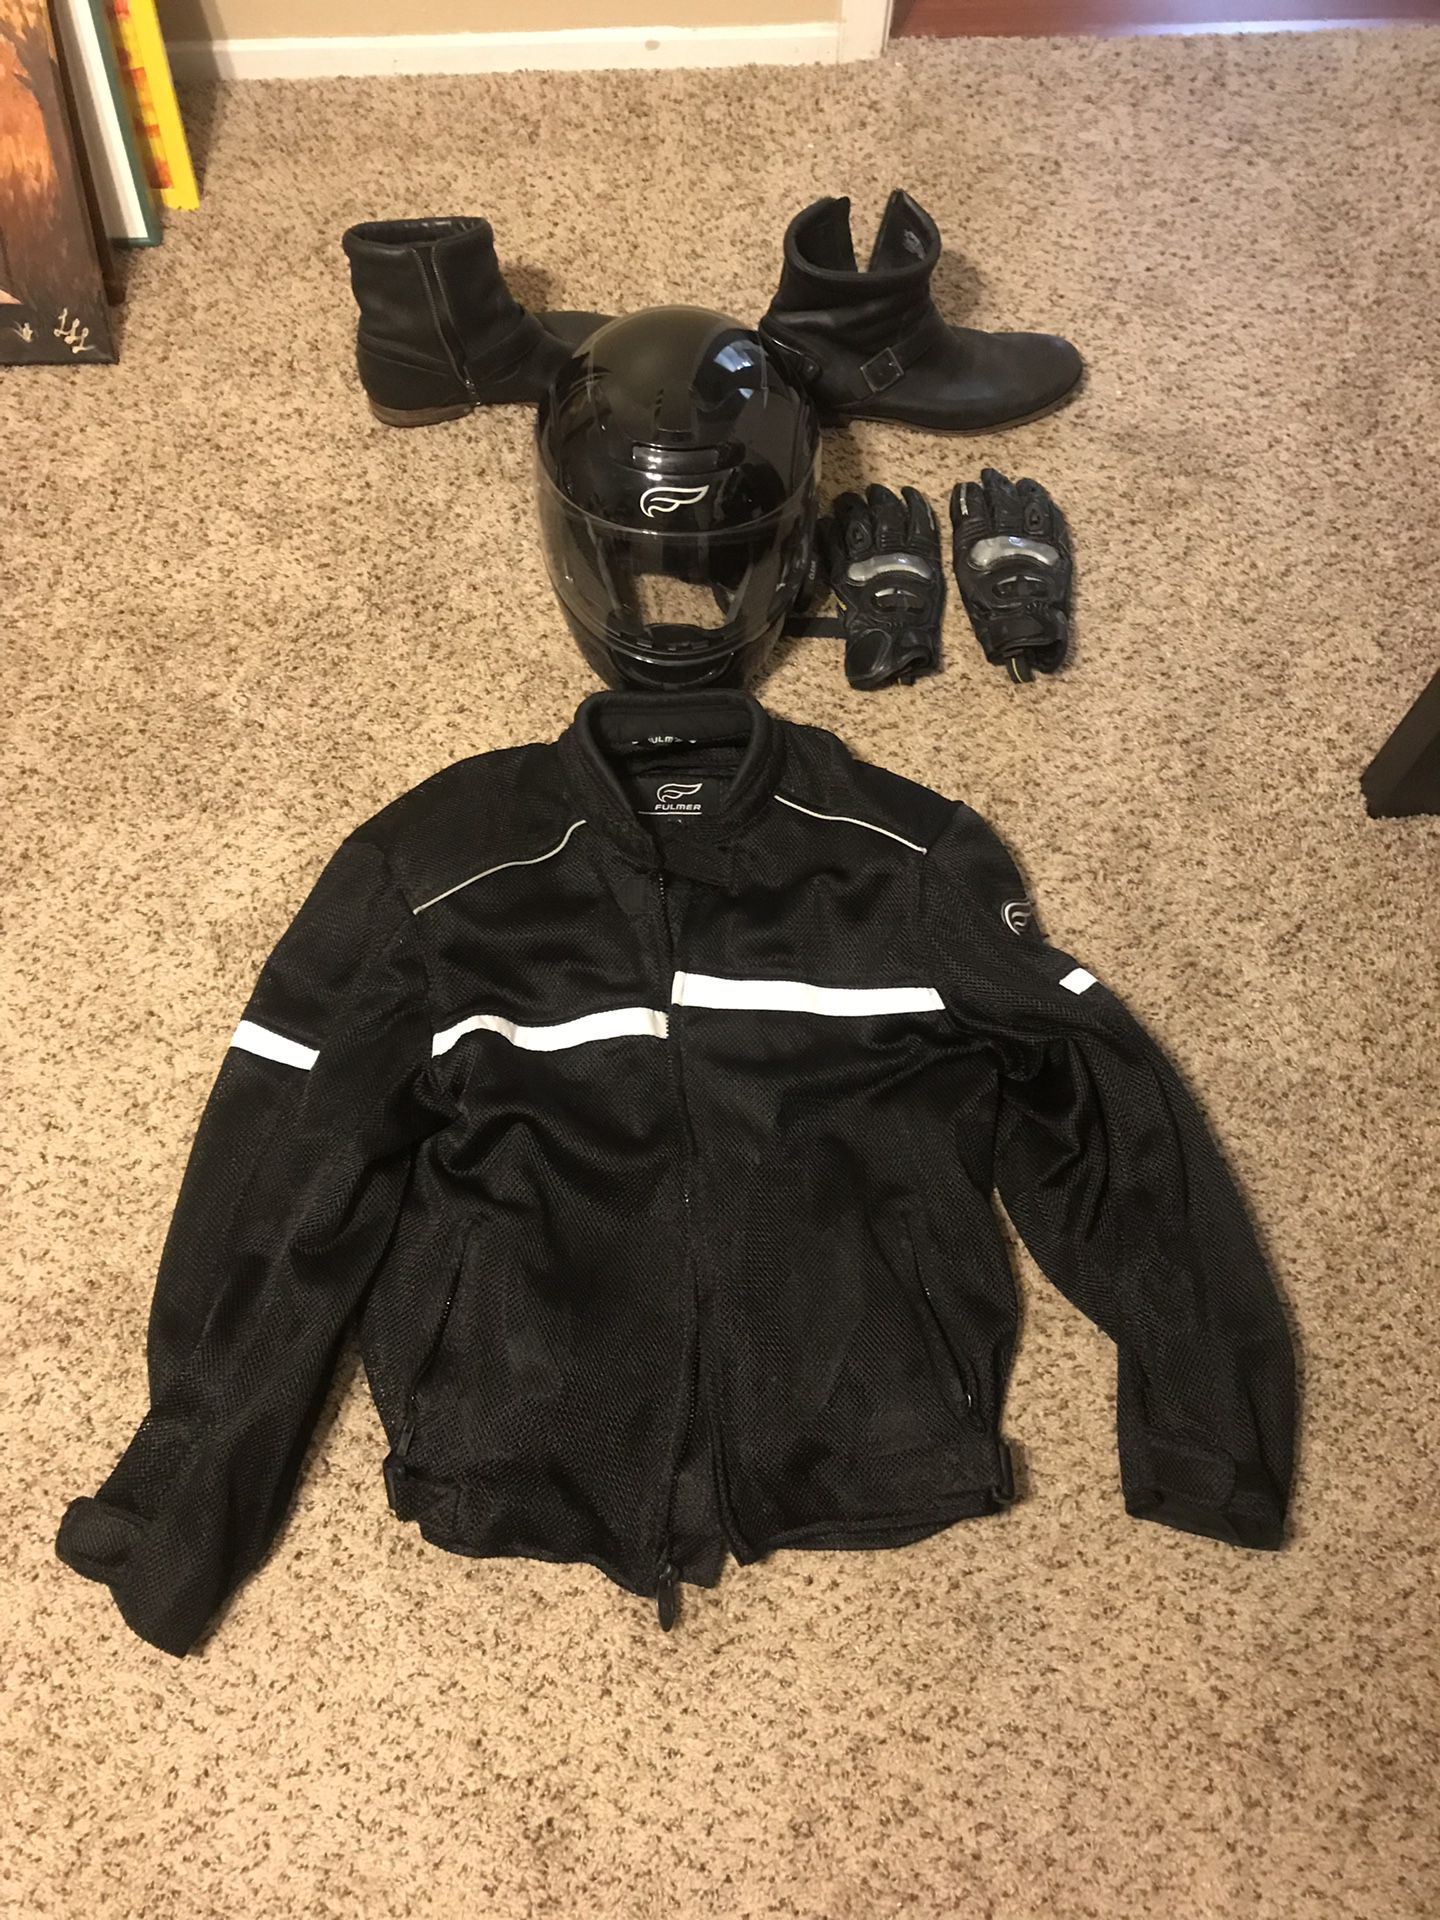 Motorcycle Safety Gear - Armored Gloves, Full Face Helmet, Boots, Armored Jacket